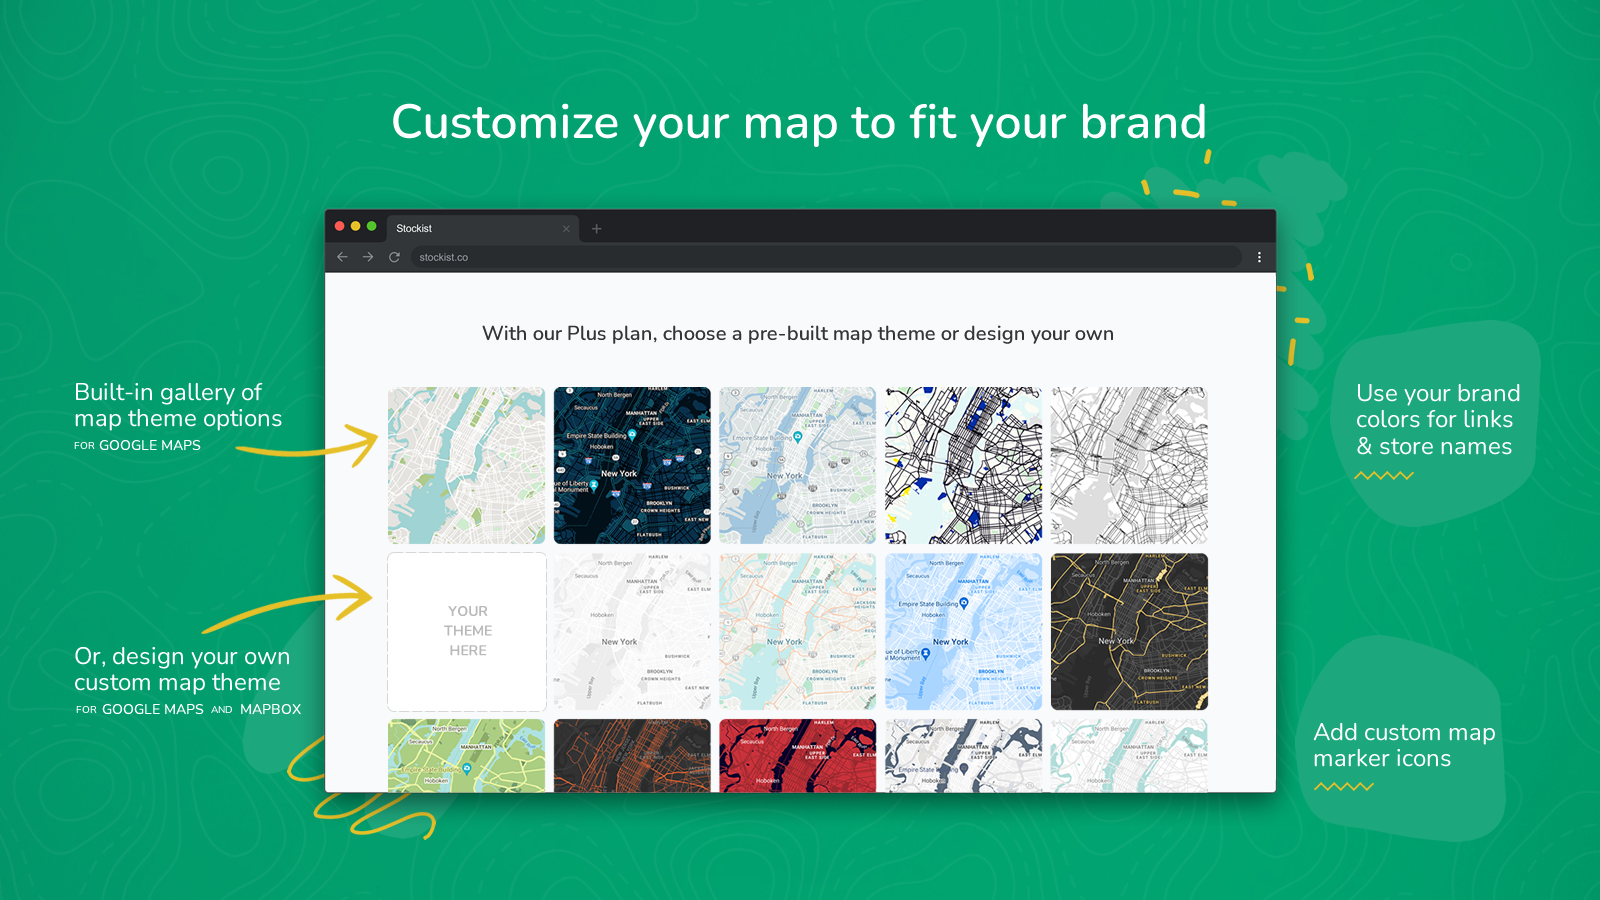 Customize your map to fit your brand